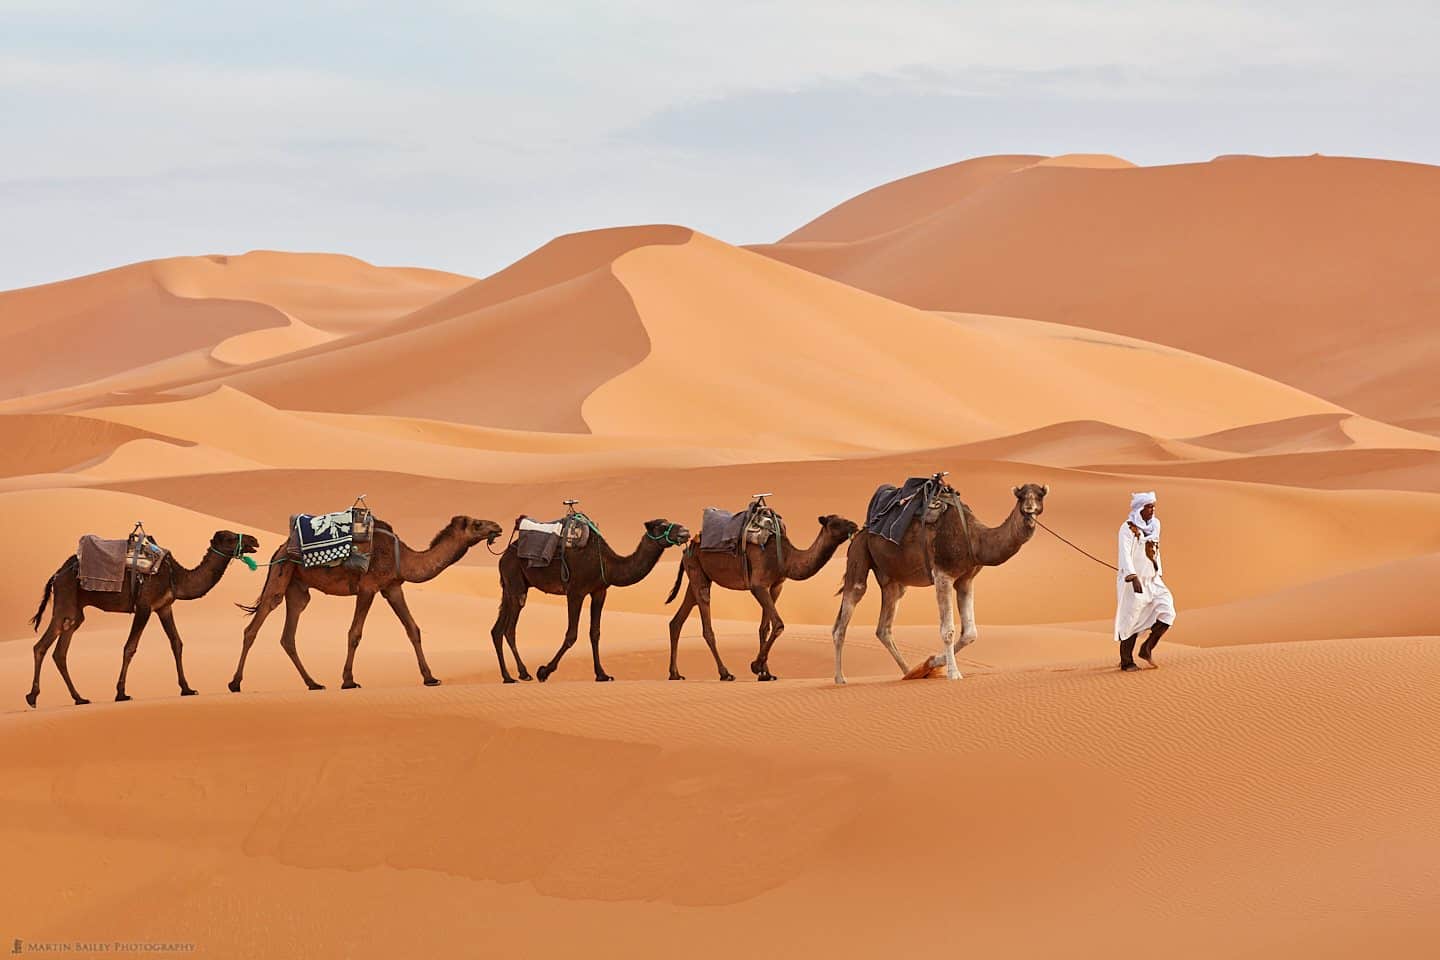 Camels and Handler in Sahara